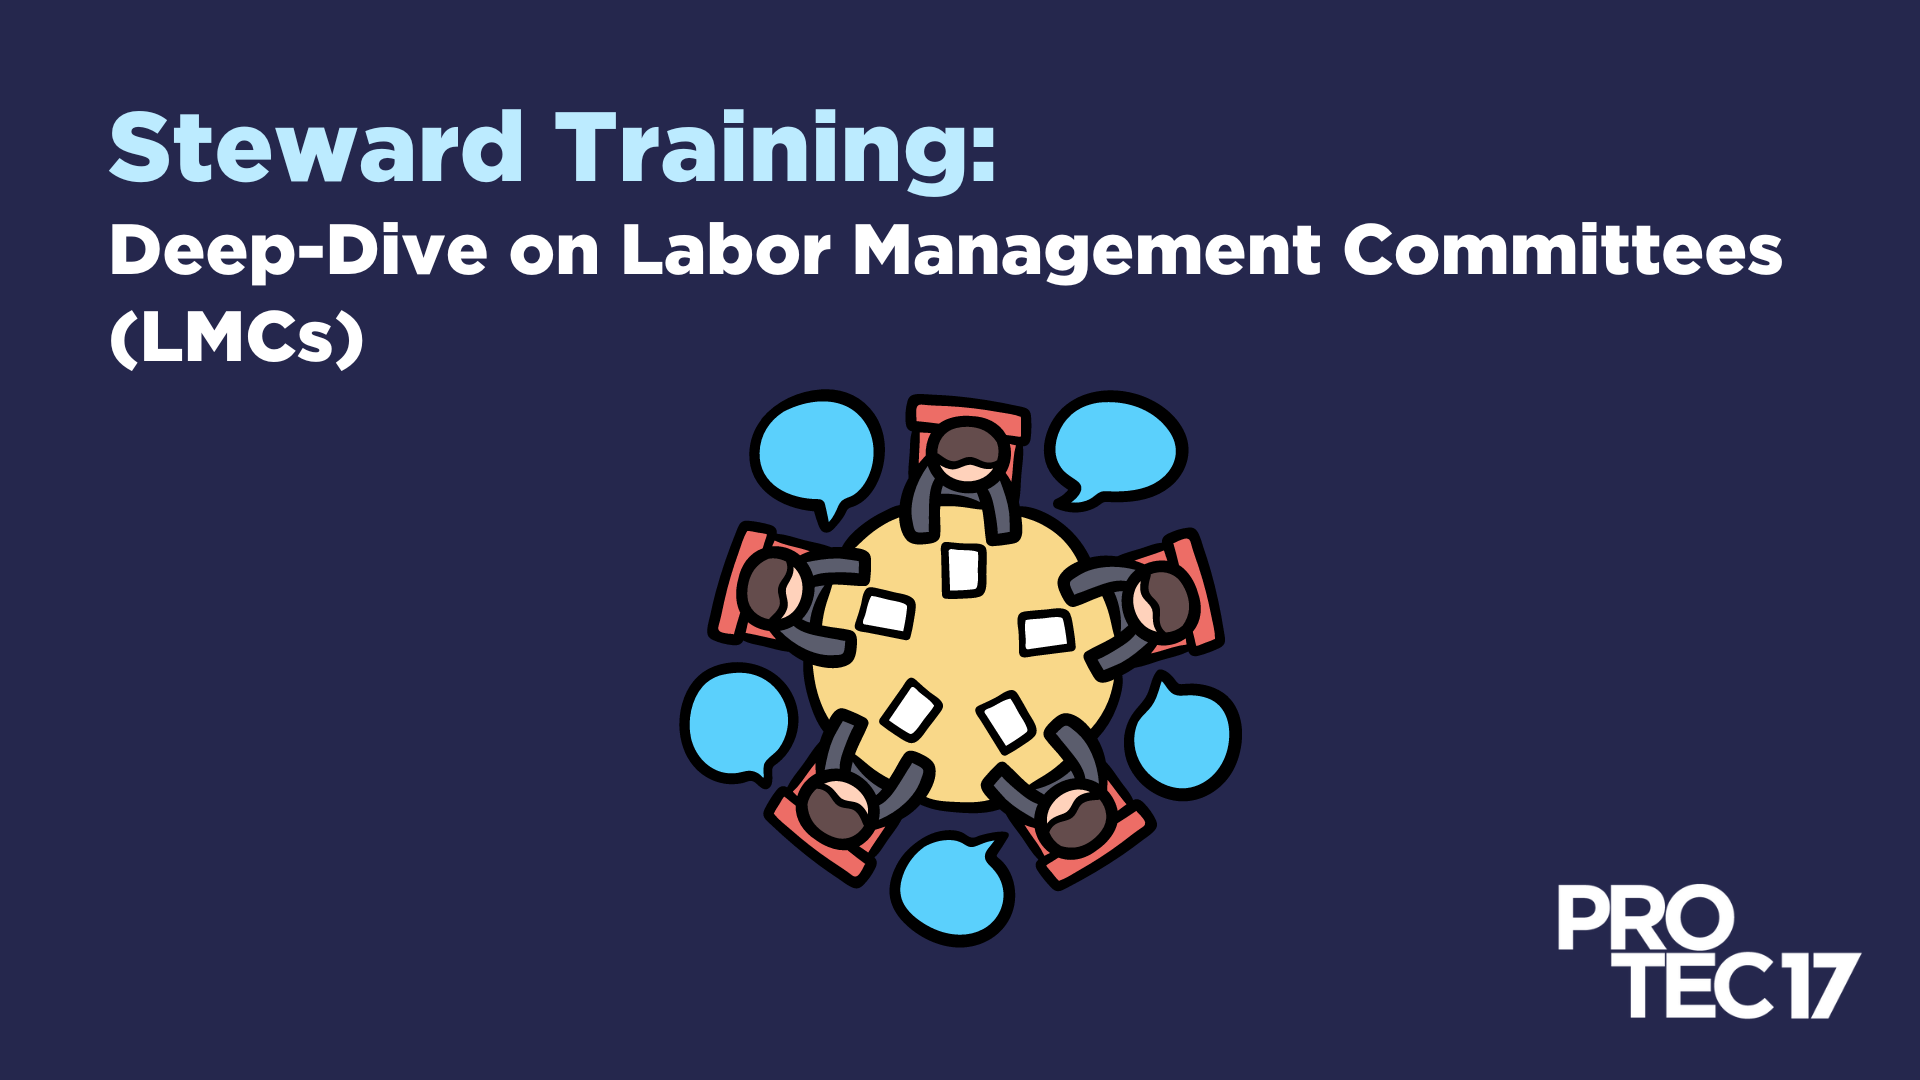 On a dark blue background, the light blue text at the top reads, "Steward Training:" followed by smaller, white text that reads, "Deep-Dive on Labor Management Committees (LMCs)." There is a colorful graphic of people gathering around a table, with chat bubbles in between the people's heads to show that they are talking. The PROTEC17 logo is in the bottom right.